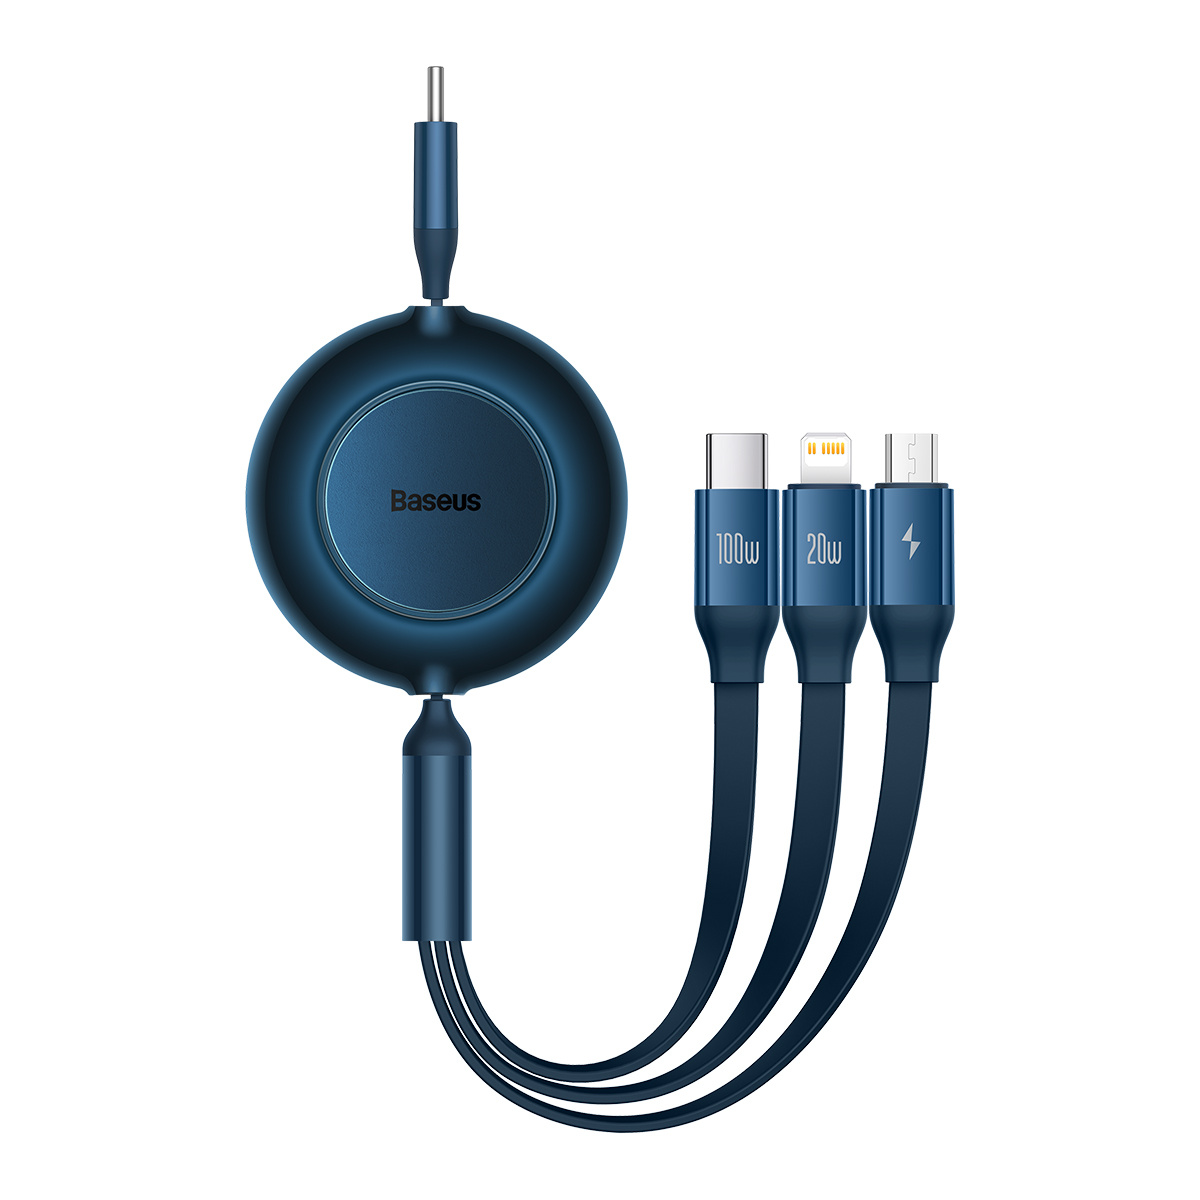 Baseus Bright Mirror 2 retractable cable 3in1 USB Type C - micro USB + Lightning + USB Type C 3.5A 1.1m blue